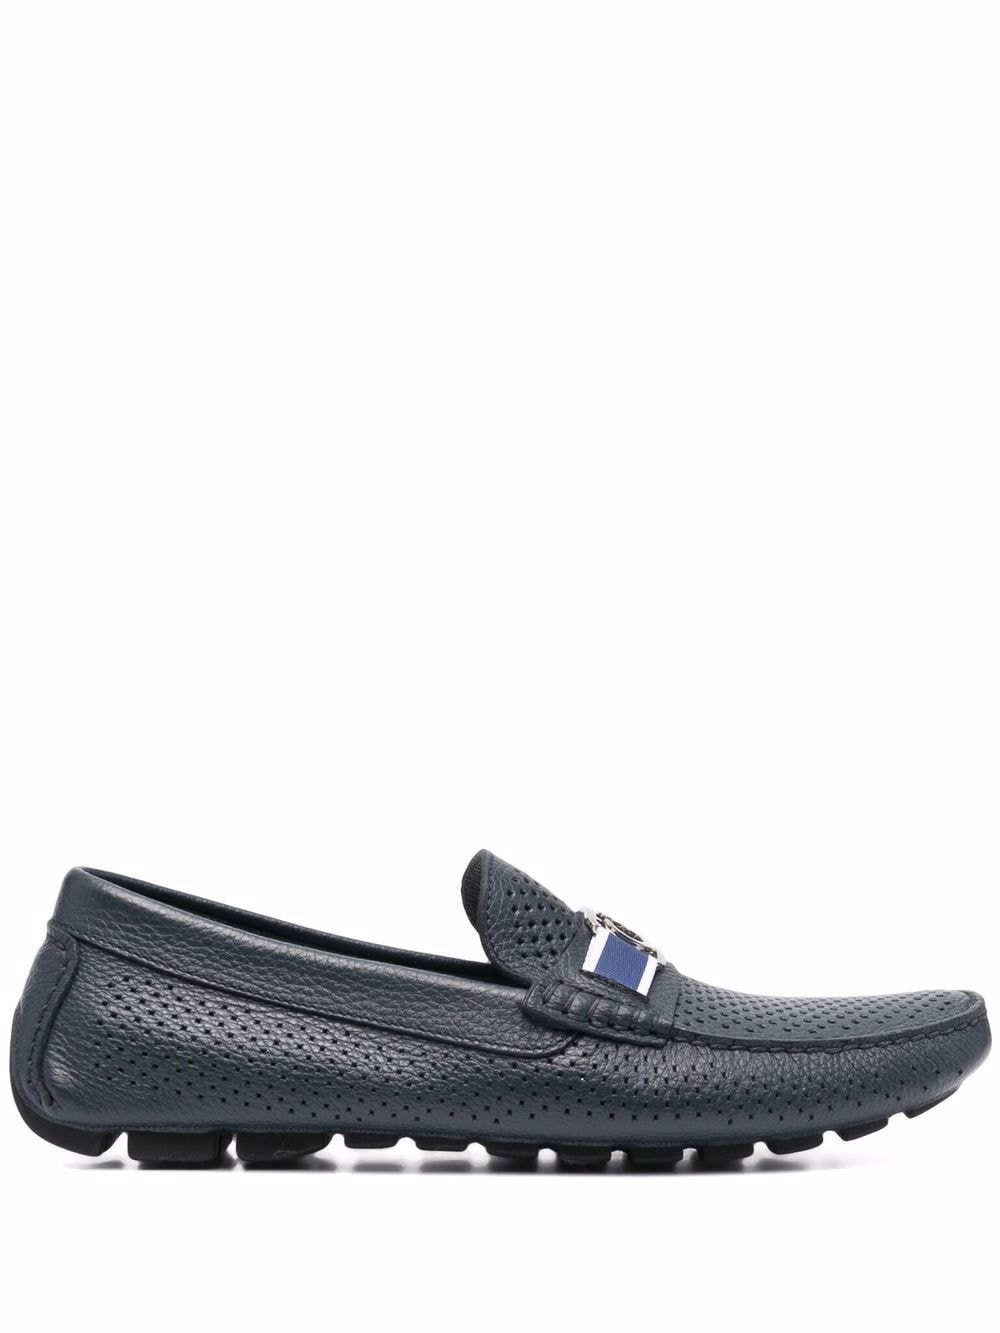 Casadei perforated leather loafers - Blue von Casadei